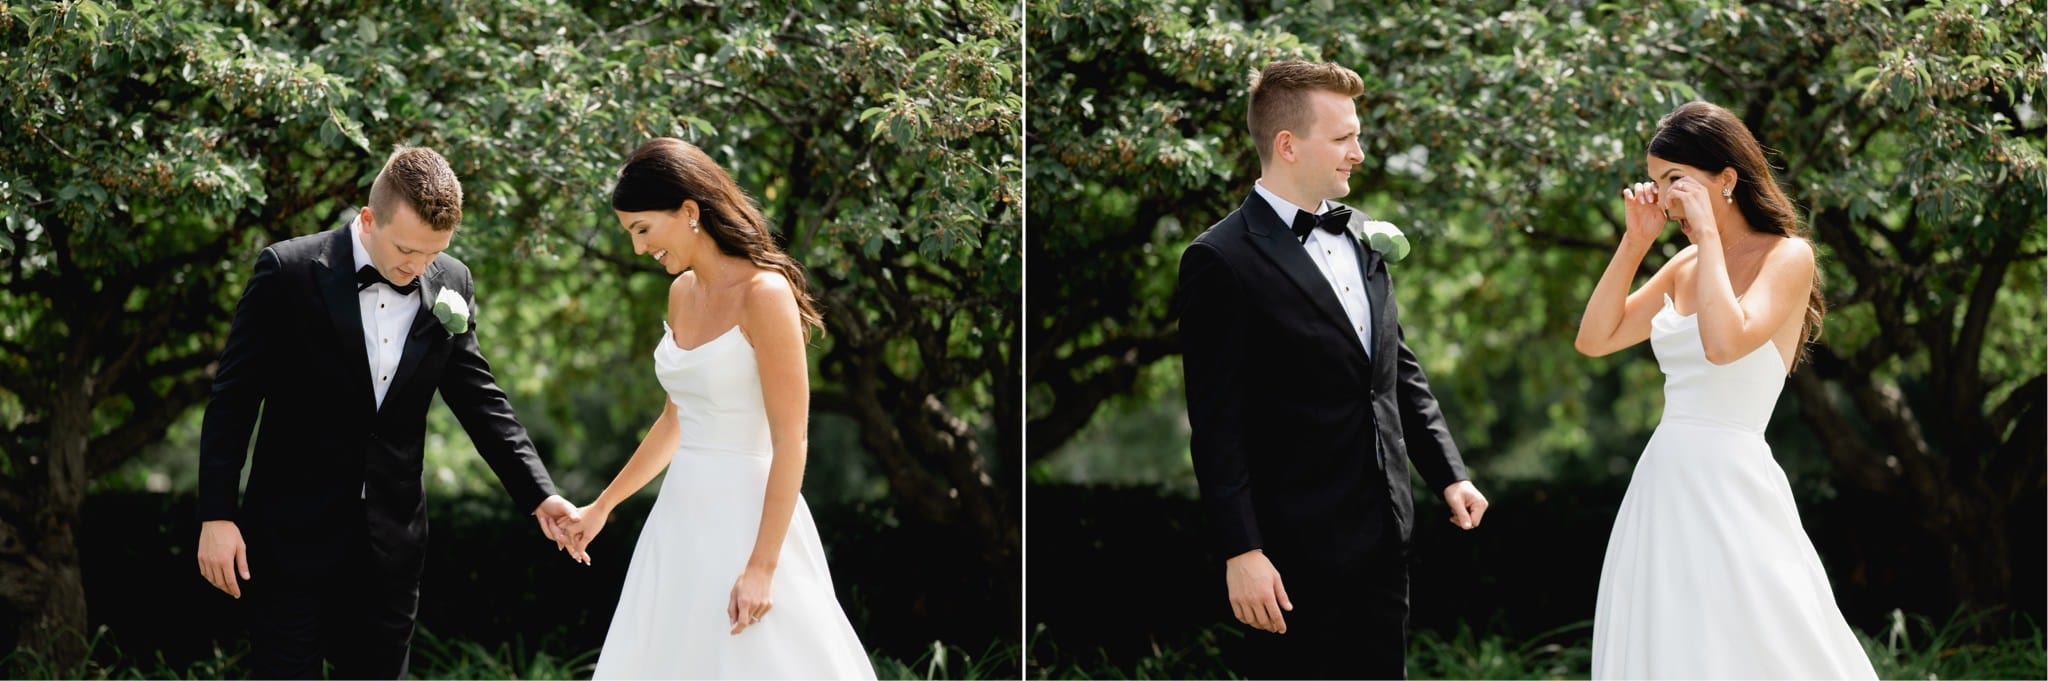 first look at glen oaks country club wedding